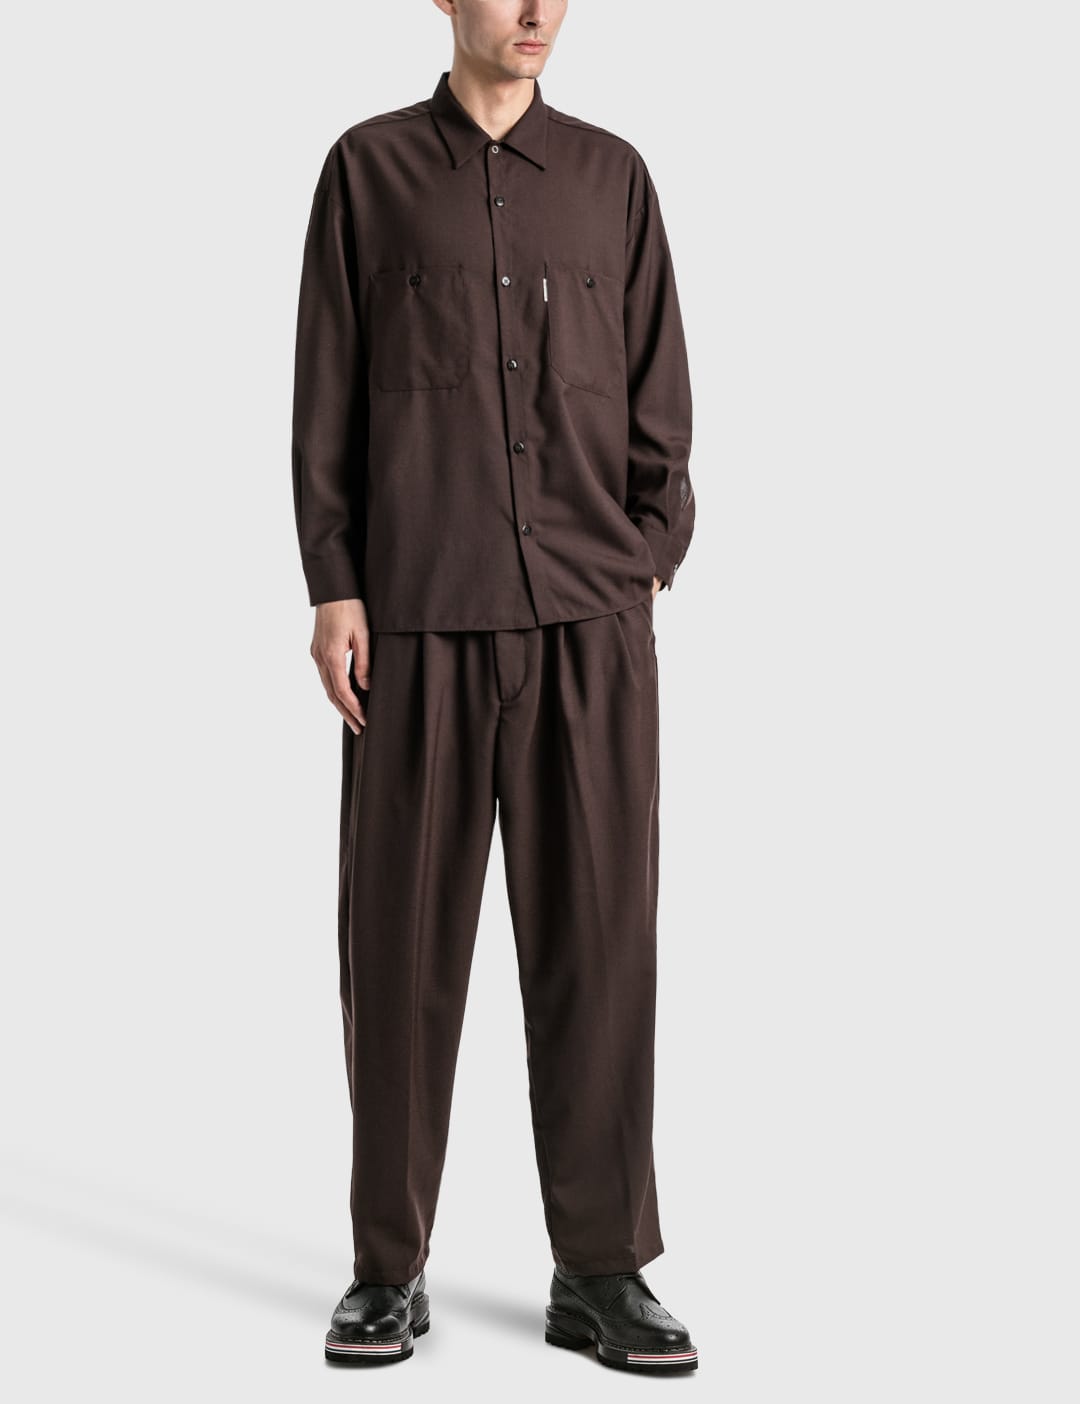 Cootie Productions - T/W 2 Tuck Easy Pants | HBX - HYPEBEAST 為您